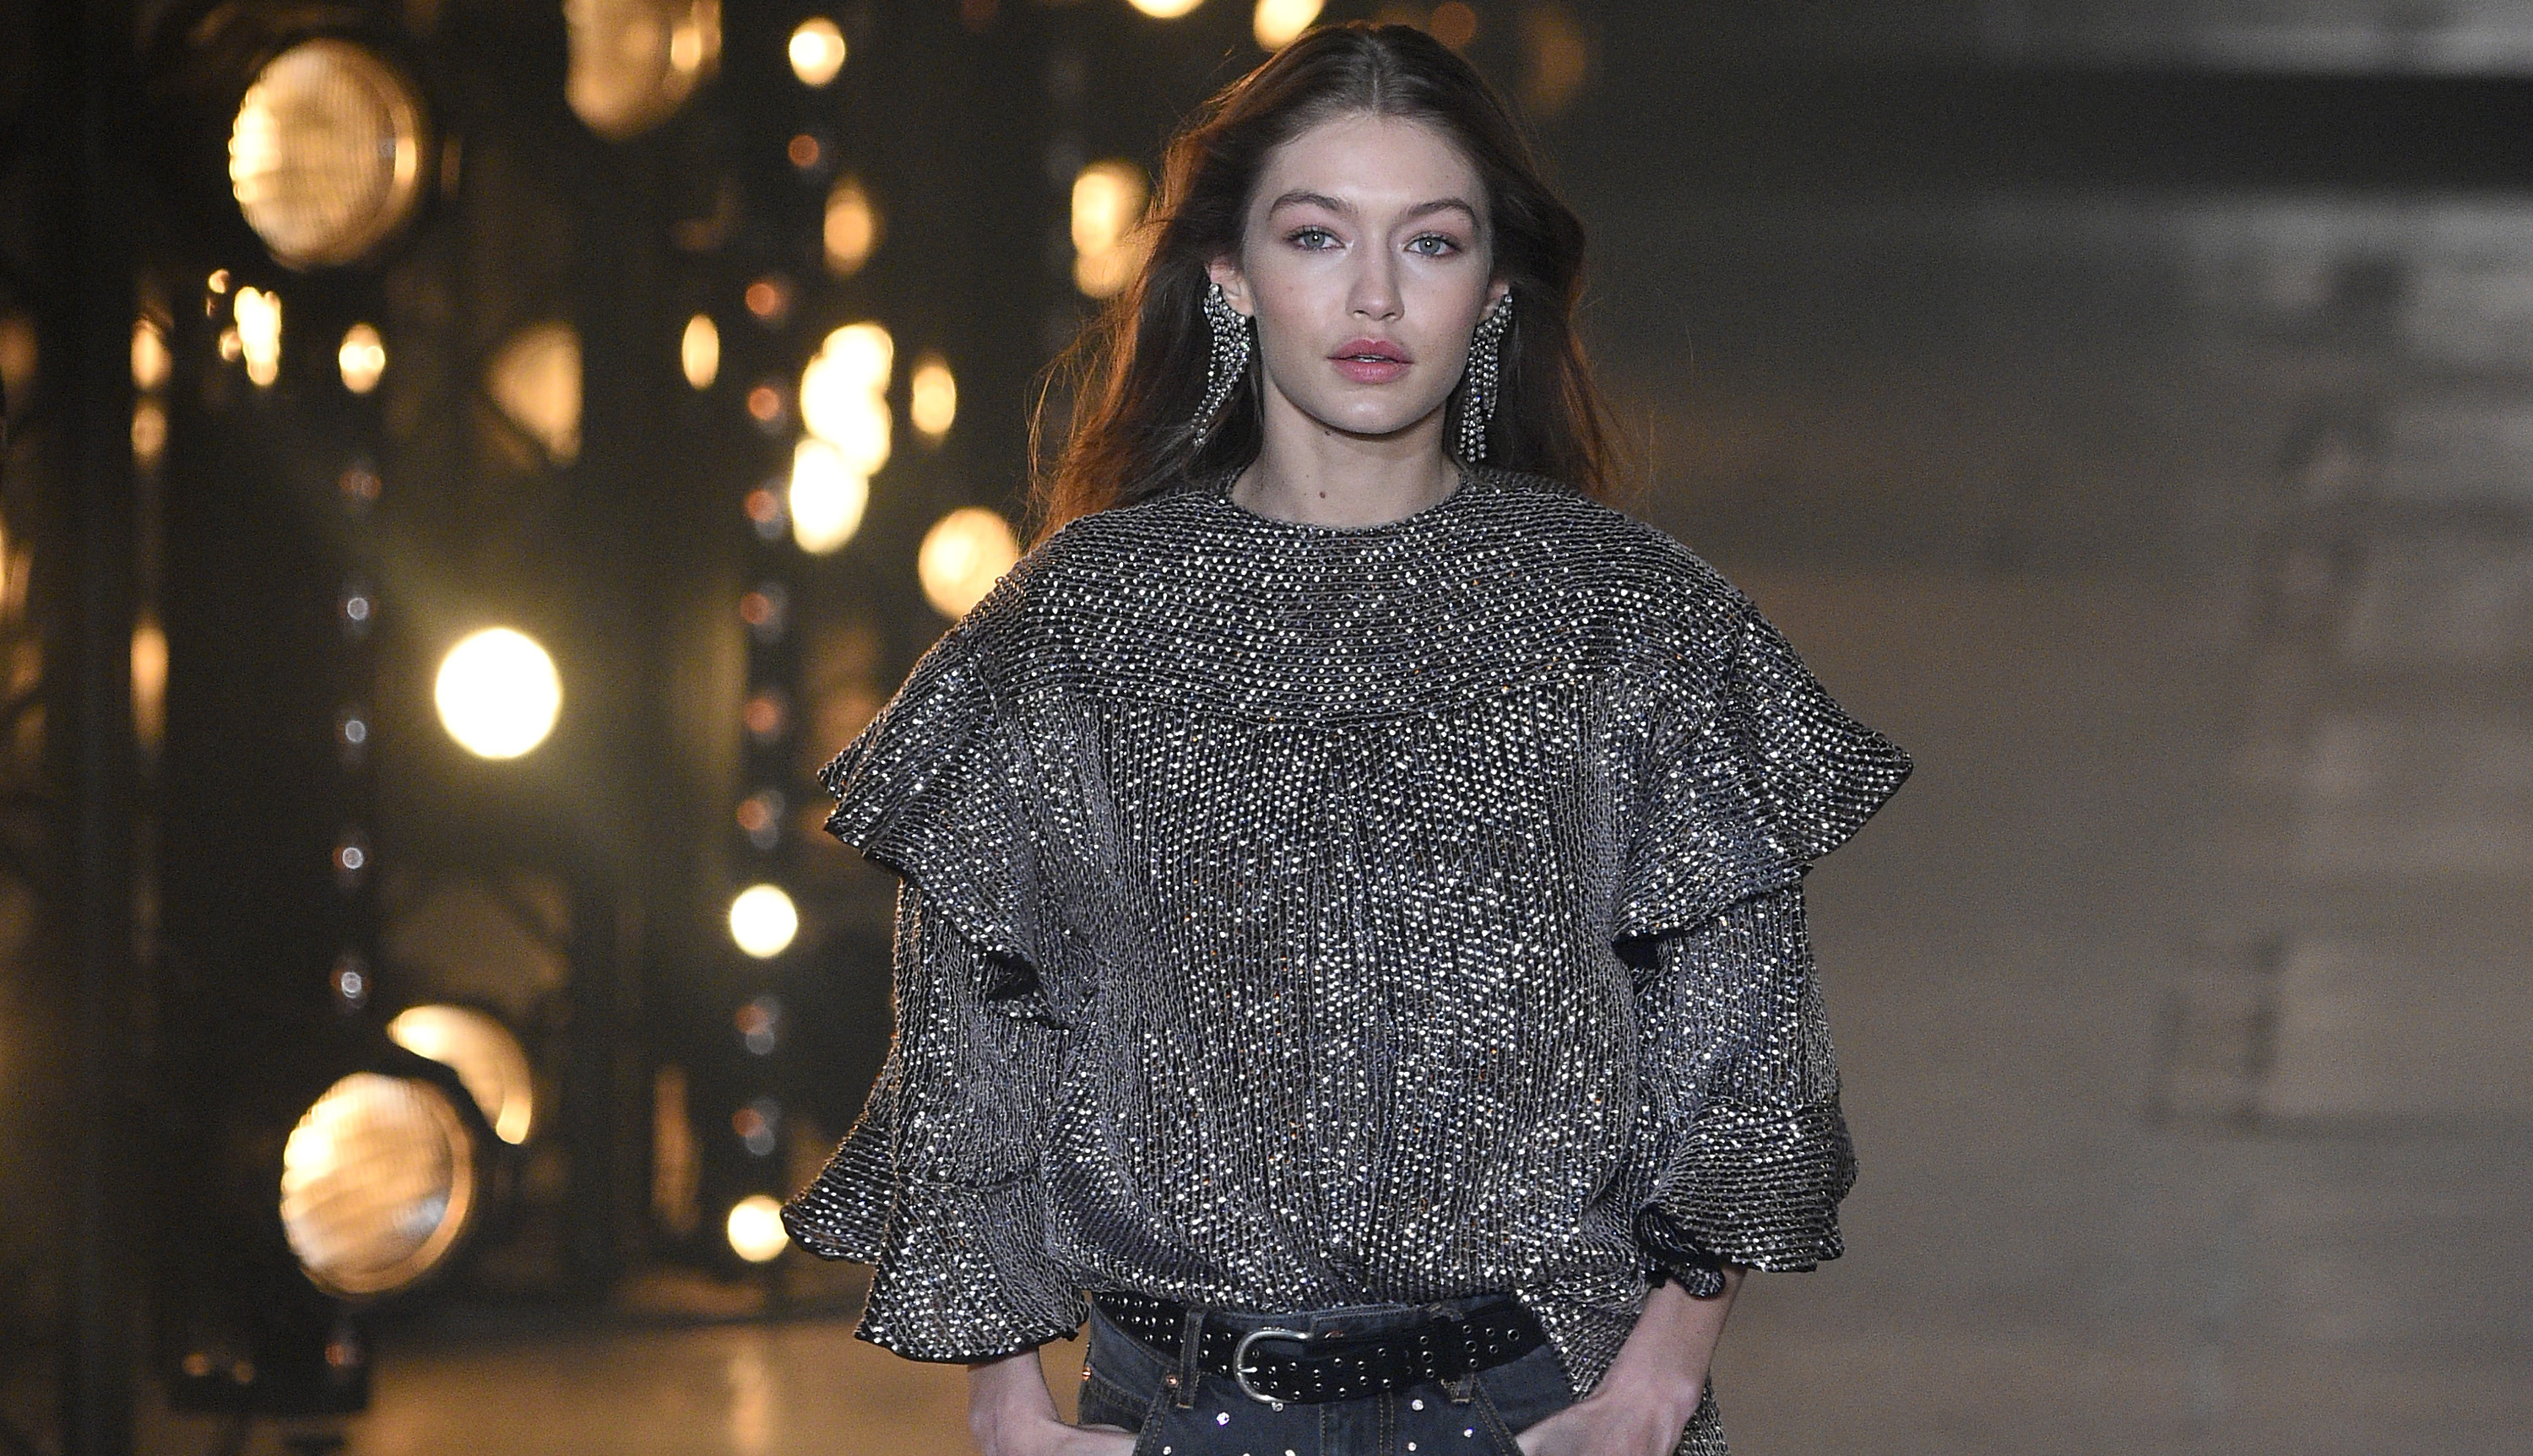 Pictures From Every Fashion Show Gigi Hadid Has Walked In